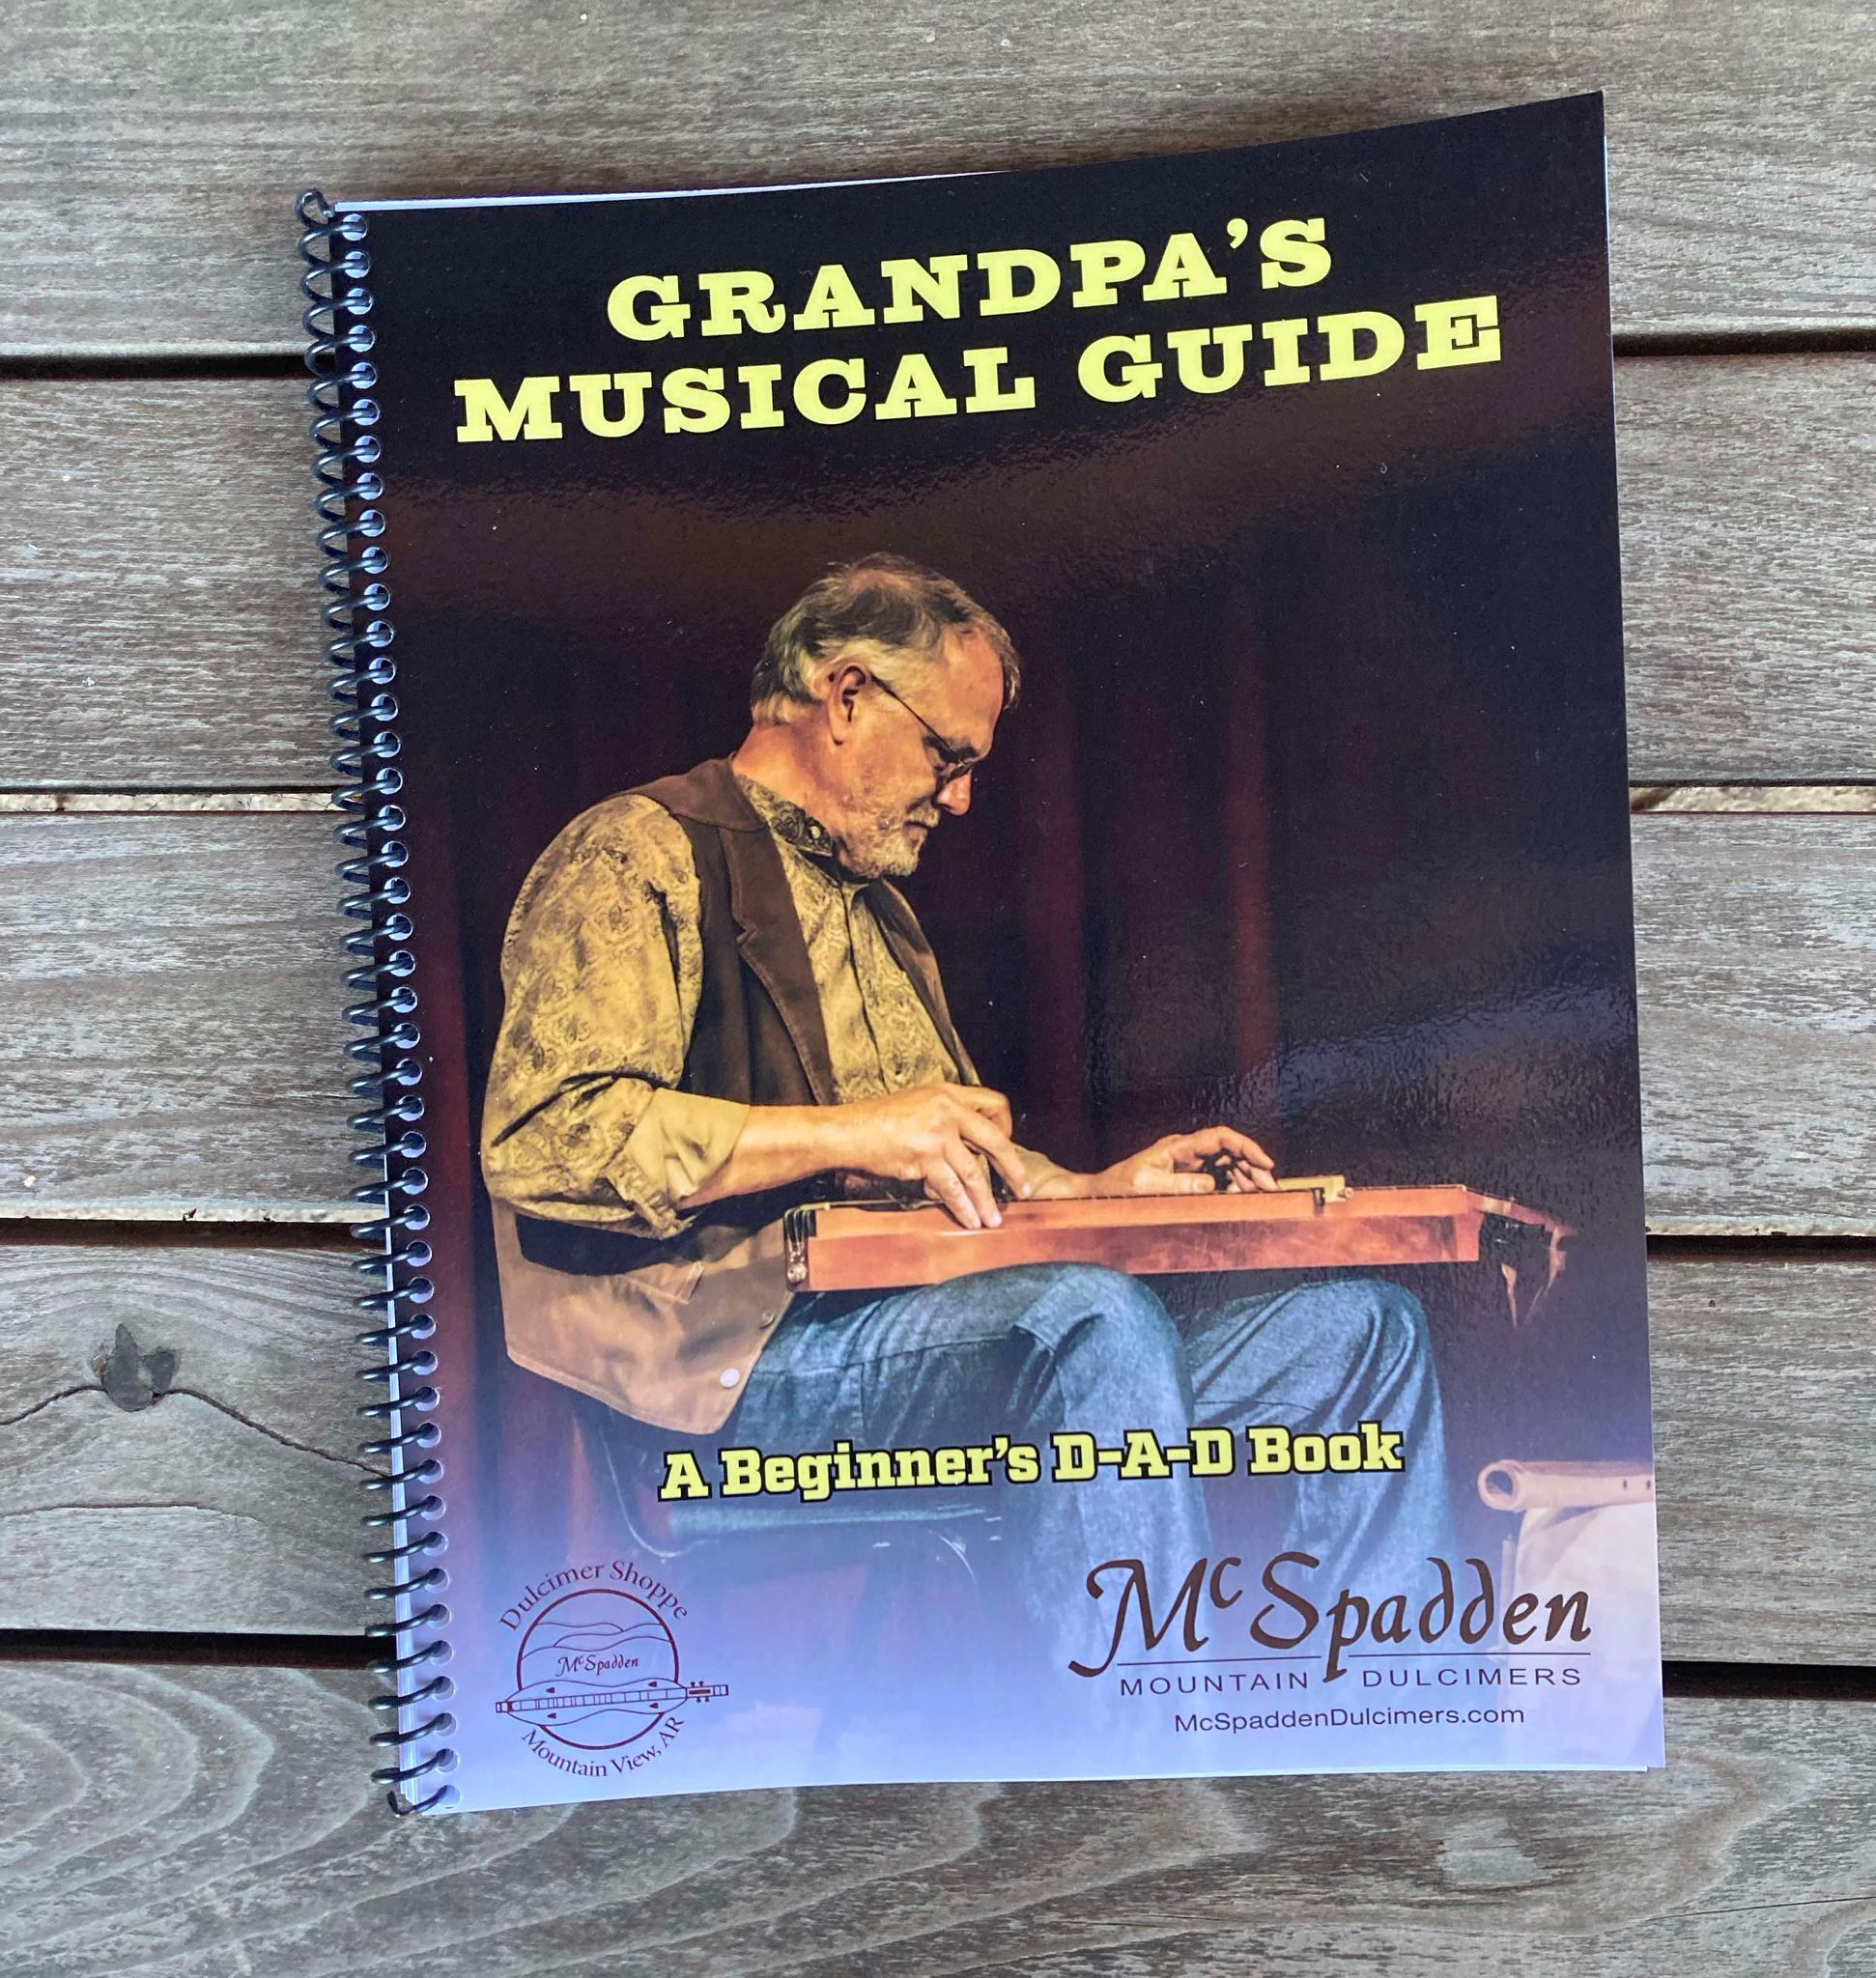 Cover of "Grandpa's Musical Guide or Songs Your Grandkids Should Know Book - by Red Dog Jam" featuring a man playing a mountain dulcimer, produced by McSpadden Mountain Dulcimers. The beginner's book is spiral-bound and rests on a wooden surface, ready to introduce you to classic nursery rhymes.